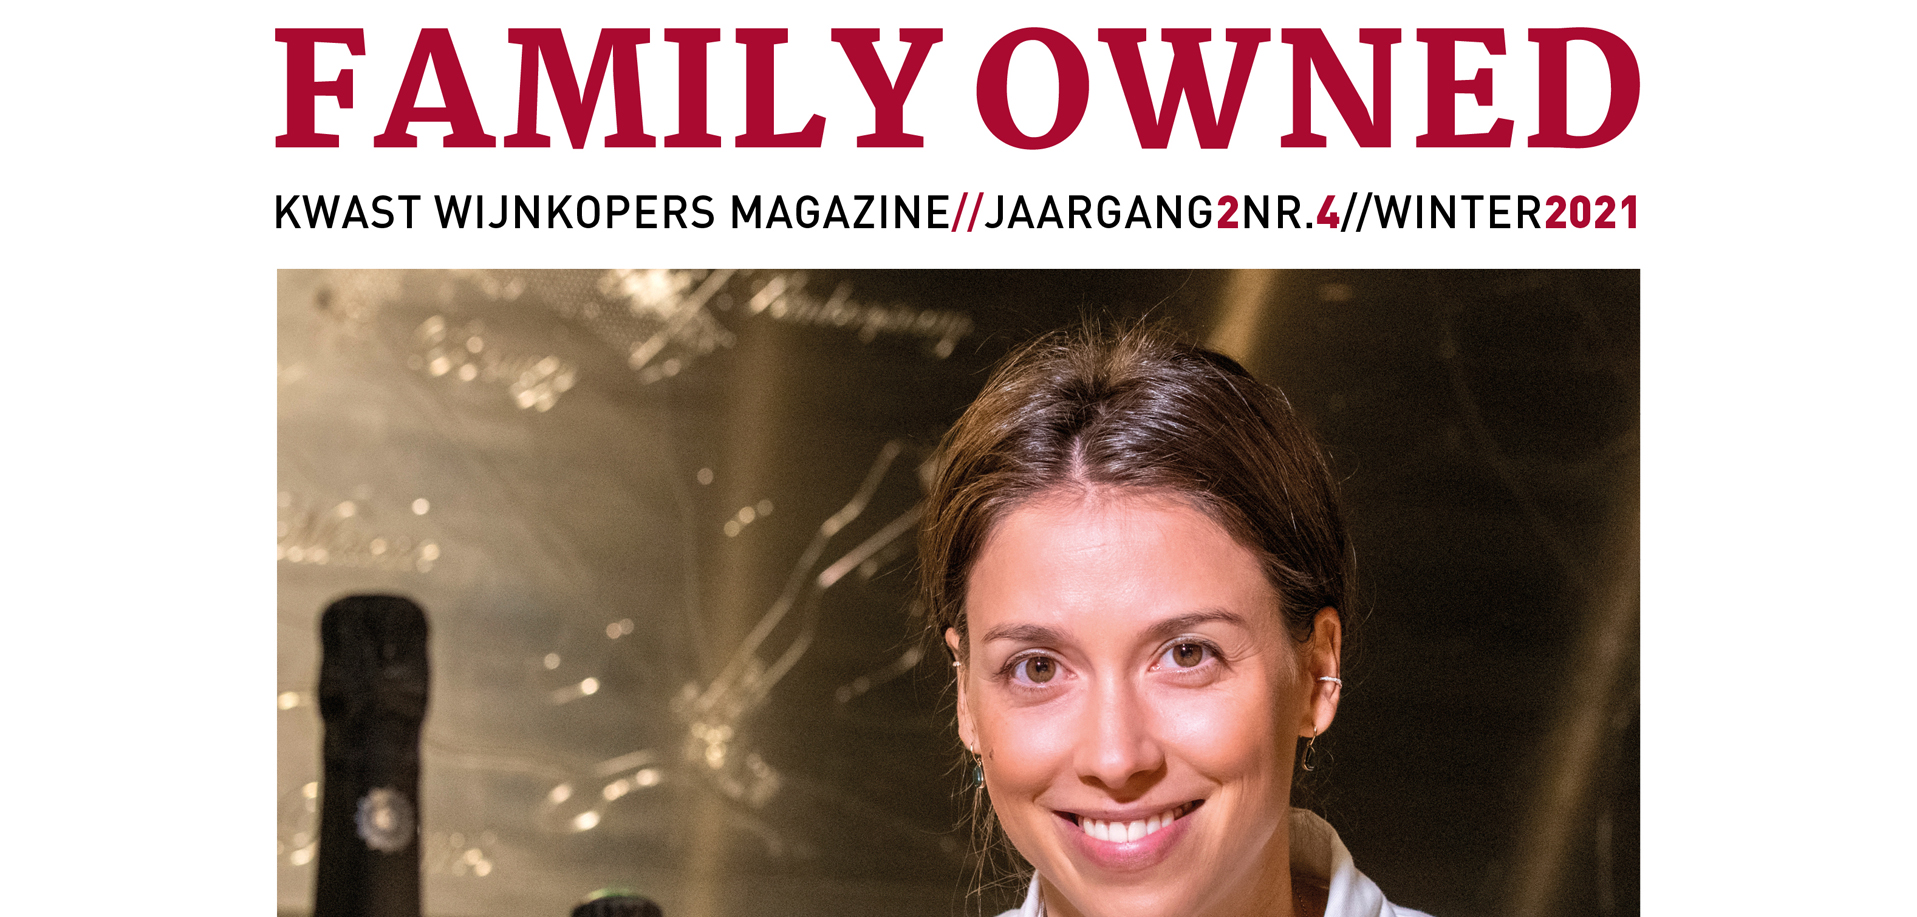 Family Owned Magazine 20214 uitgelicht